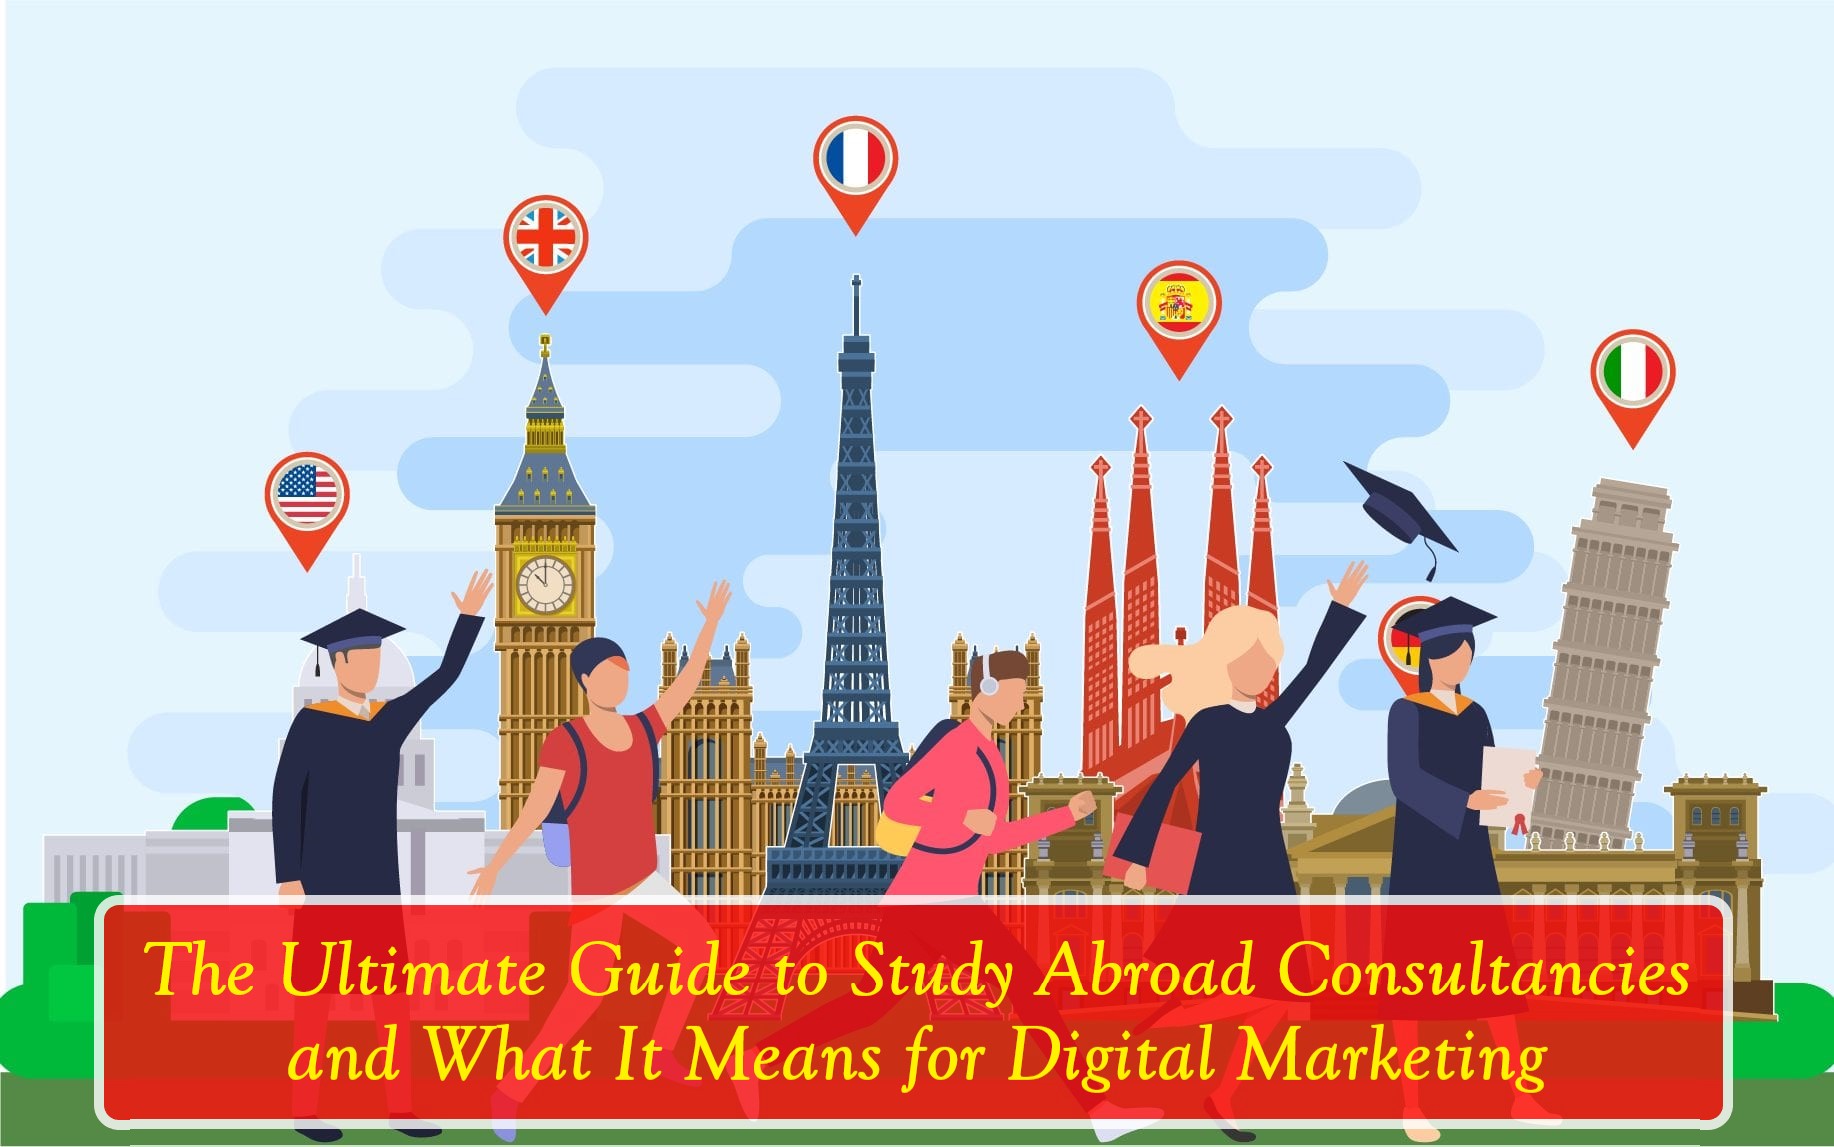 The Ultimate Guide to Study Abroad Consultancies and What It Means for Digital Marketing